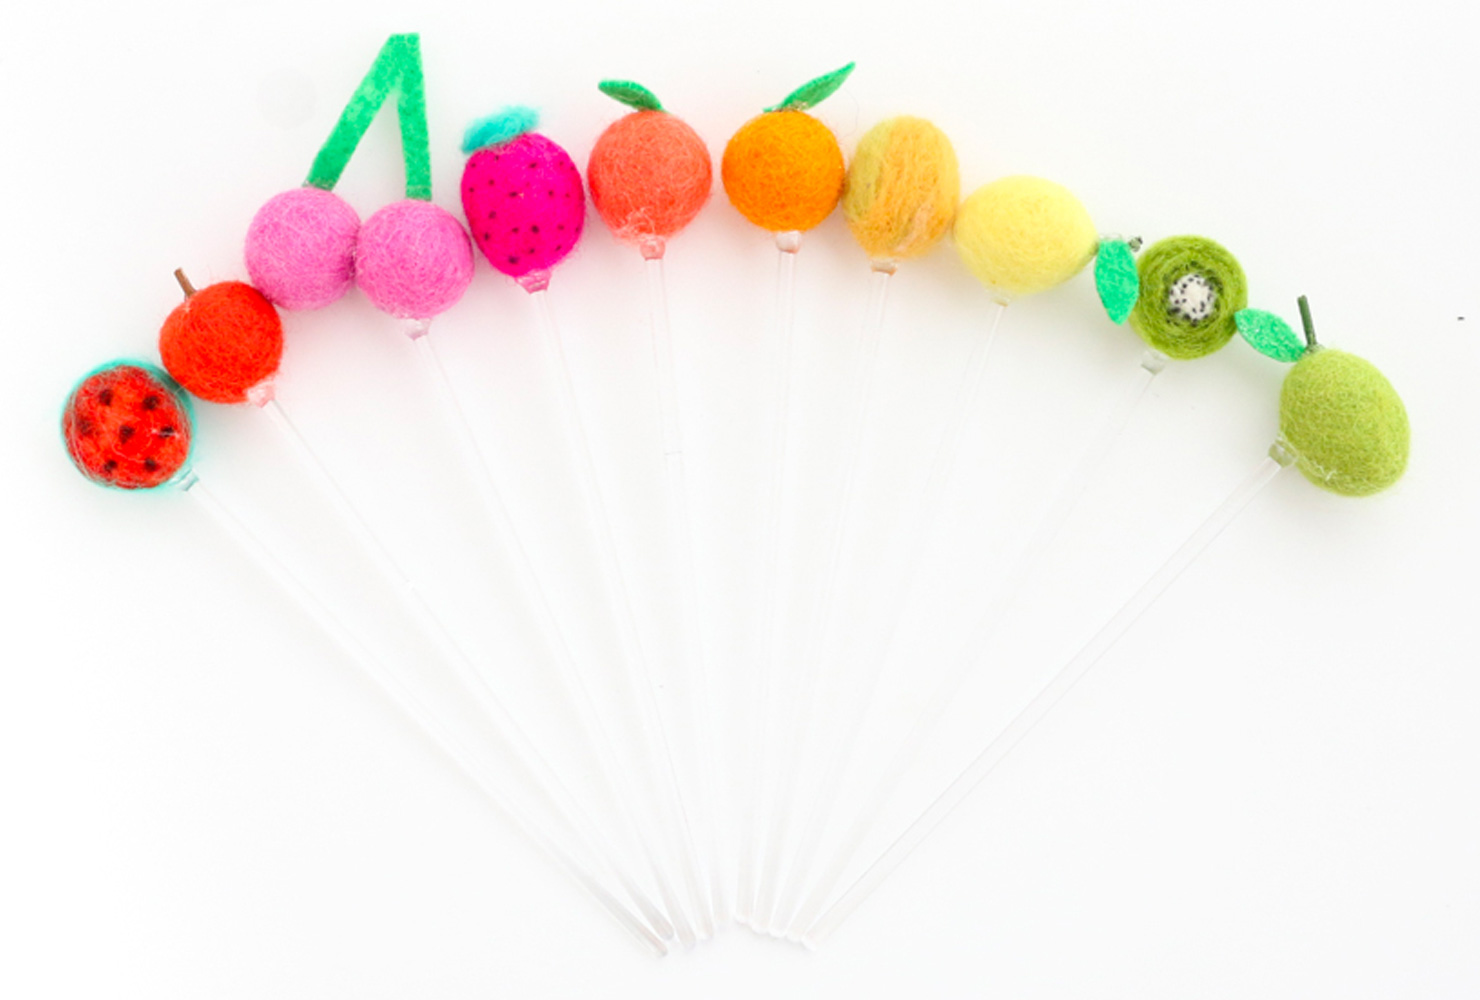 Clear drink stirrers with fruit pom poms on top.